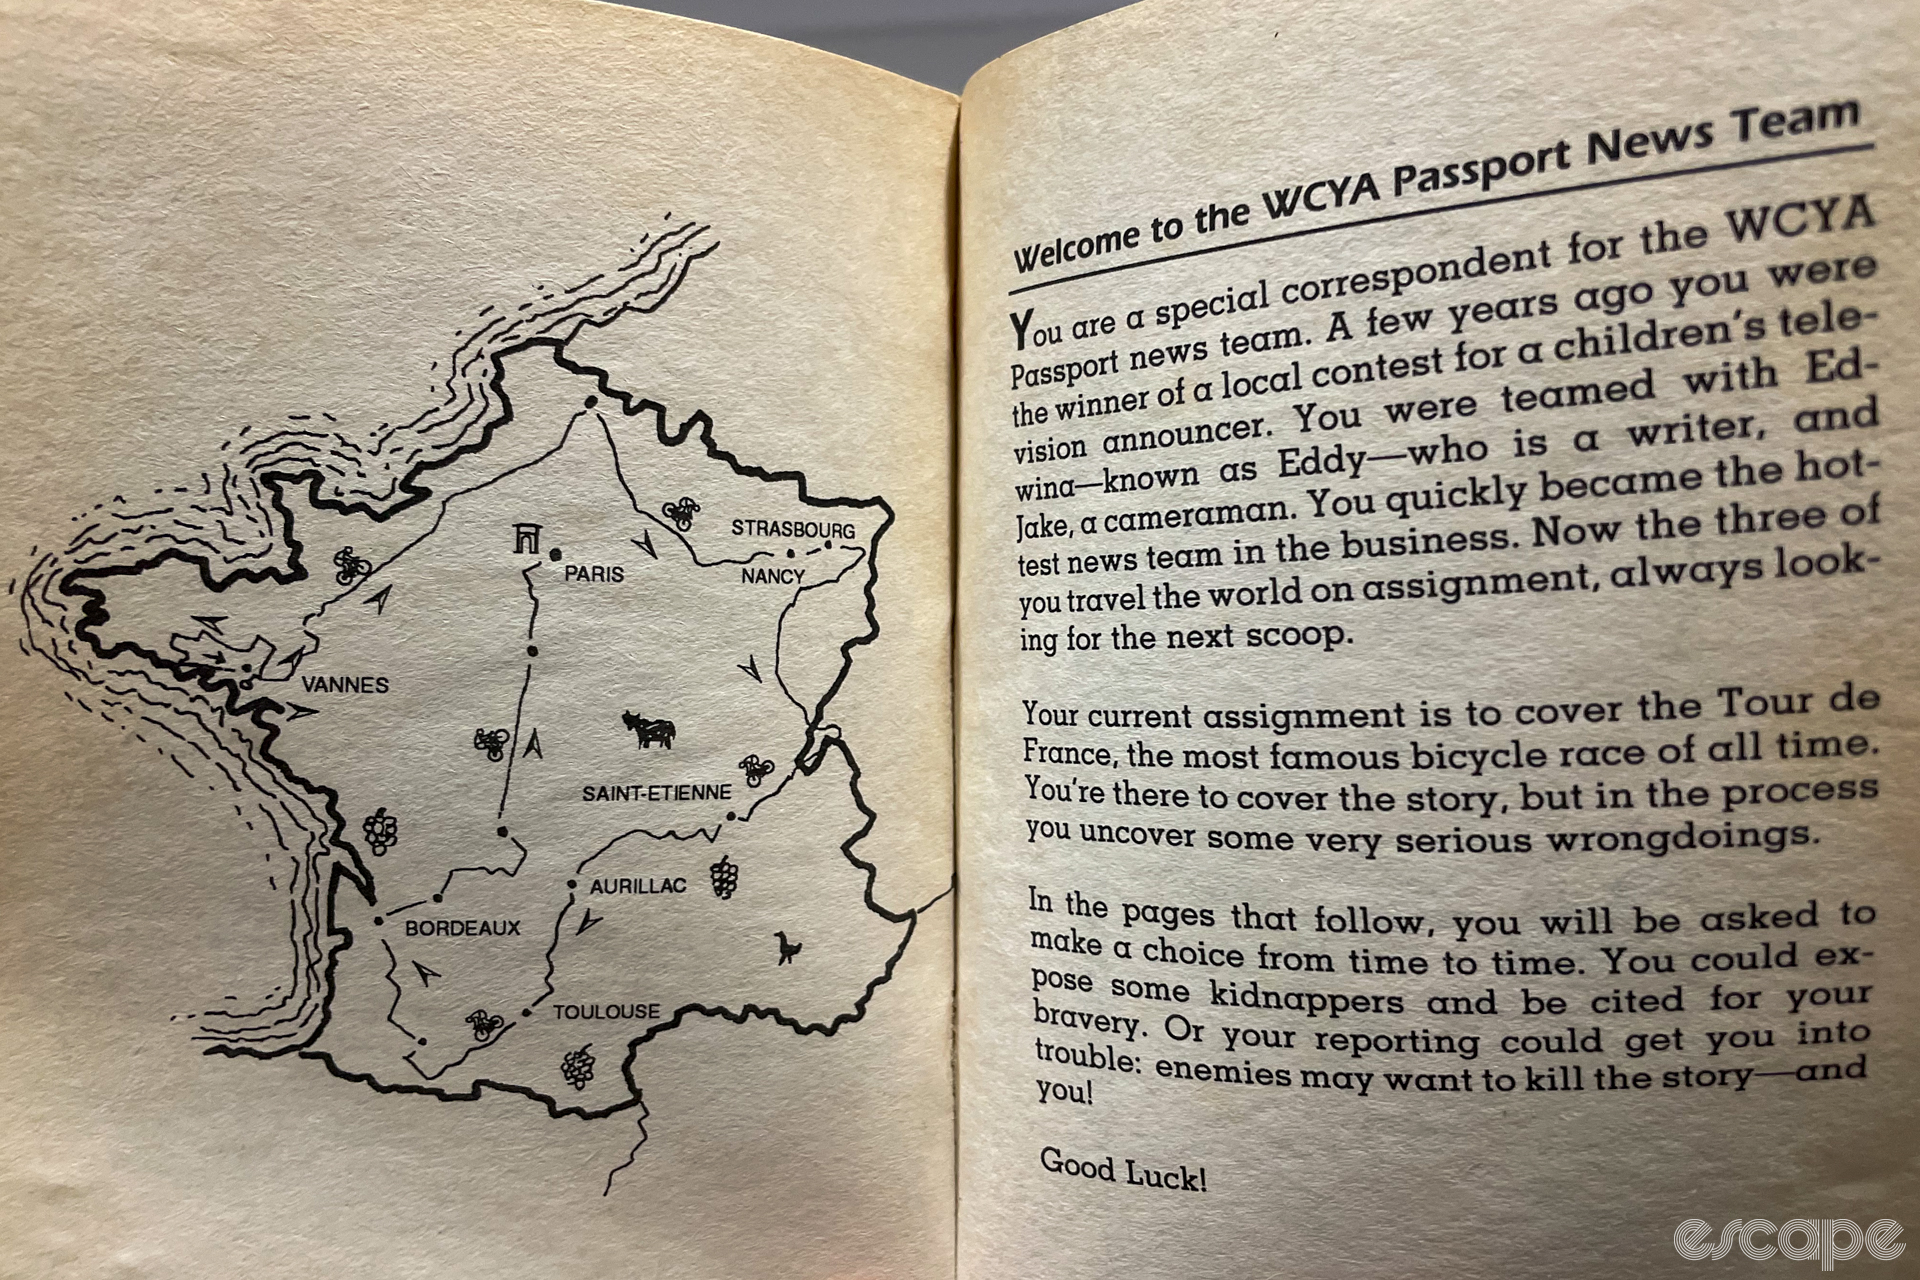 A photo of two pages of a book. The page on the left shows a map of France with a Tour de France route traced out on it. The right page is an introduction to a Choose Your Own Adventure book about being a Tour de France reporter.